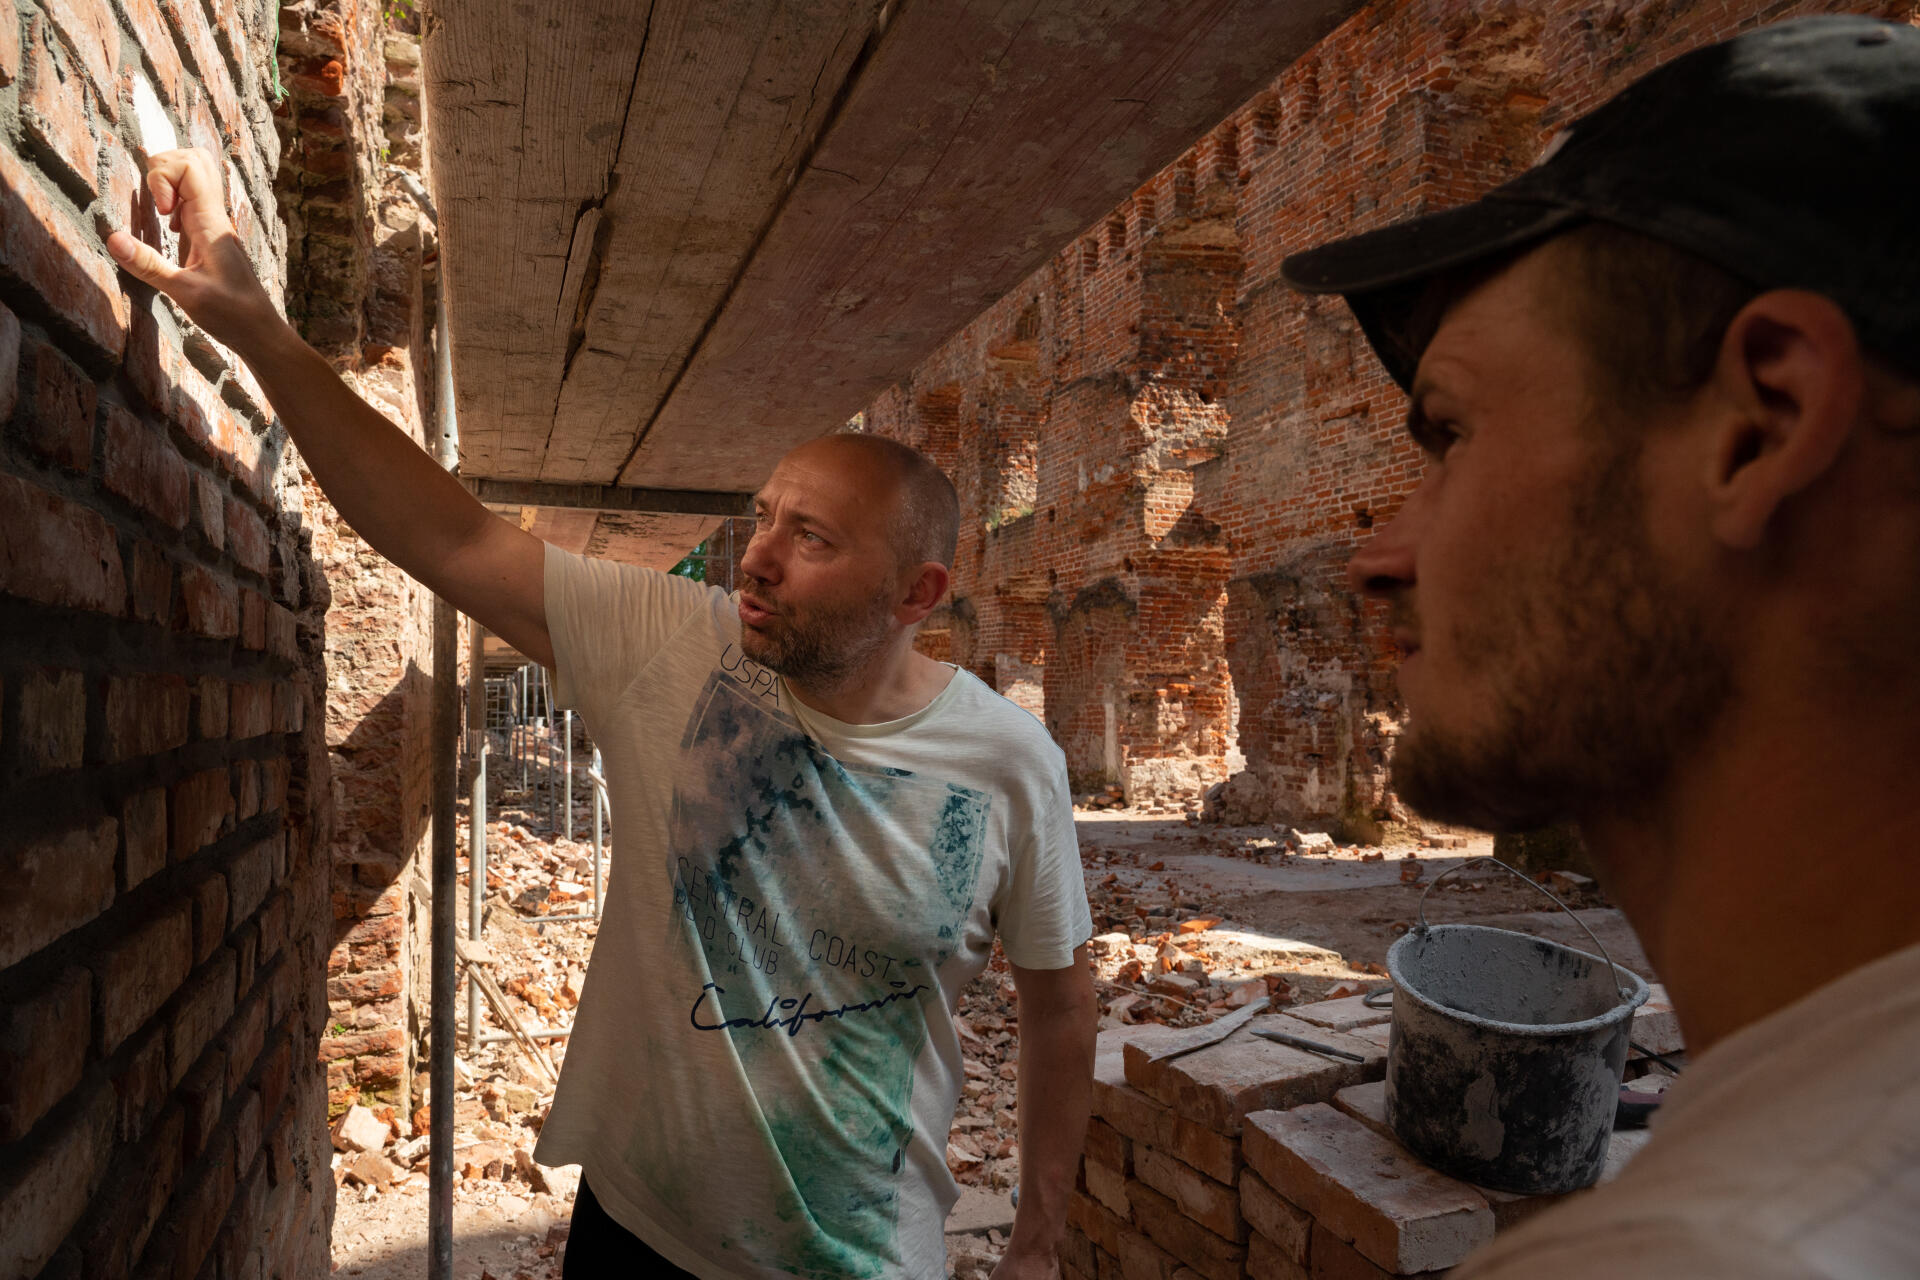 Ivan Artioukh, a contractor, talks with workers about progress on the Ragnit Castle's restoration in Neman on June 27, 2022.